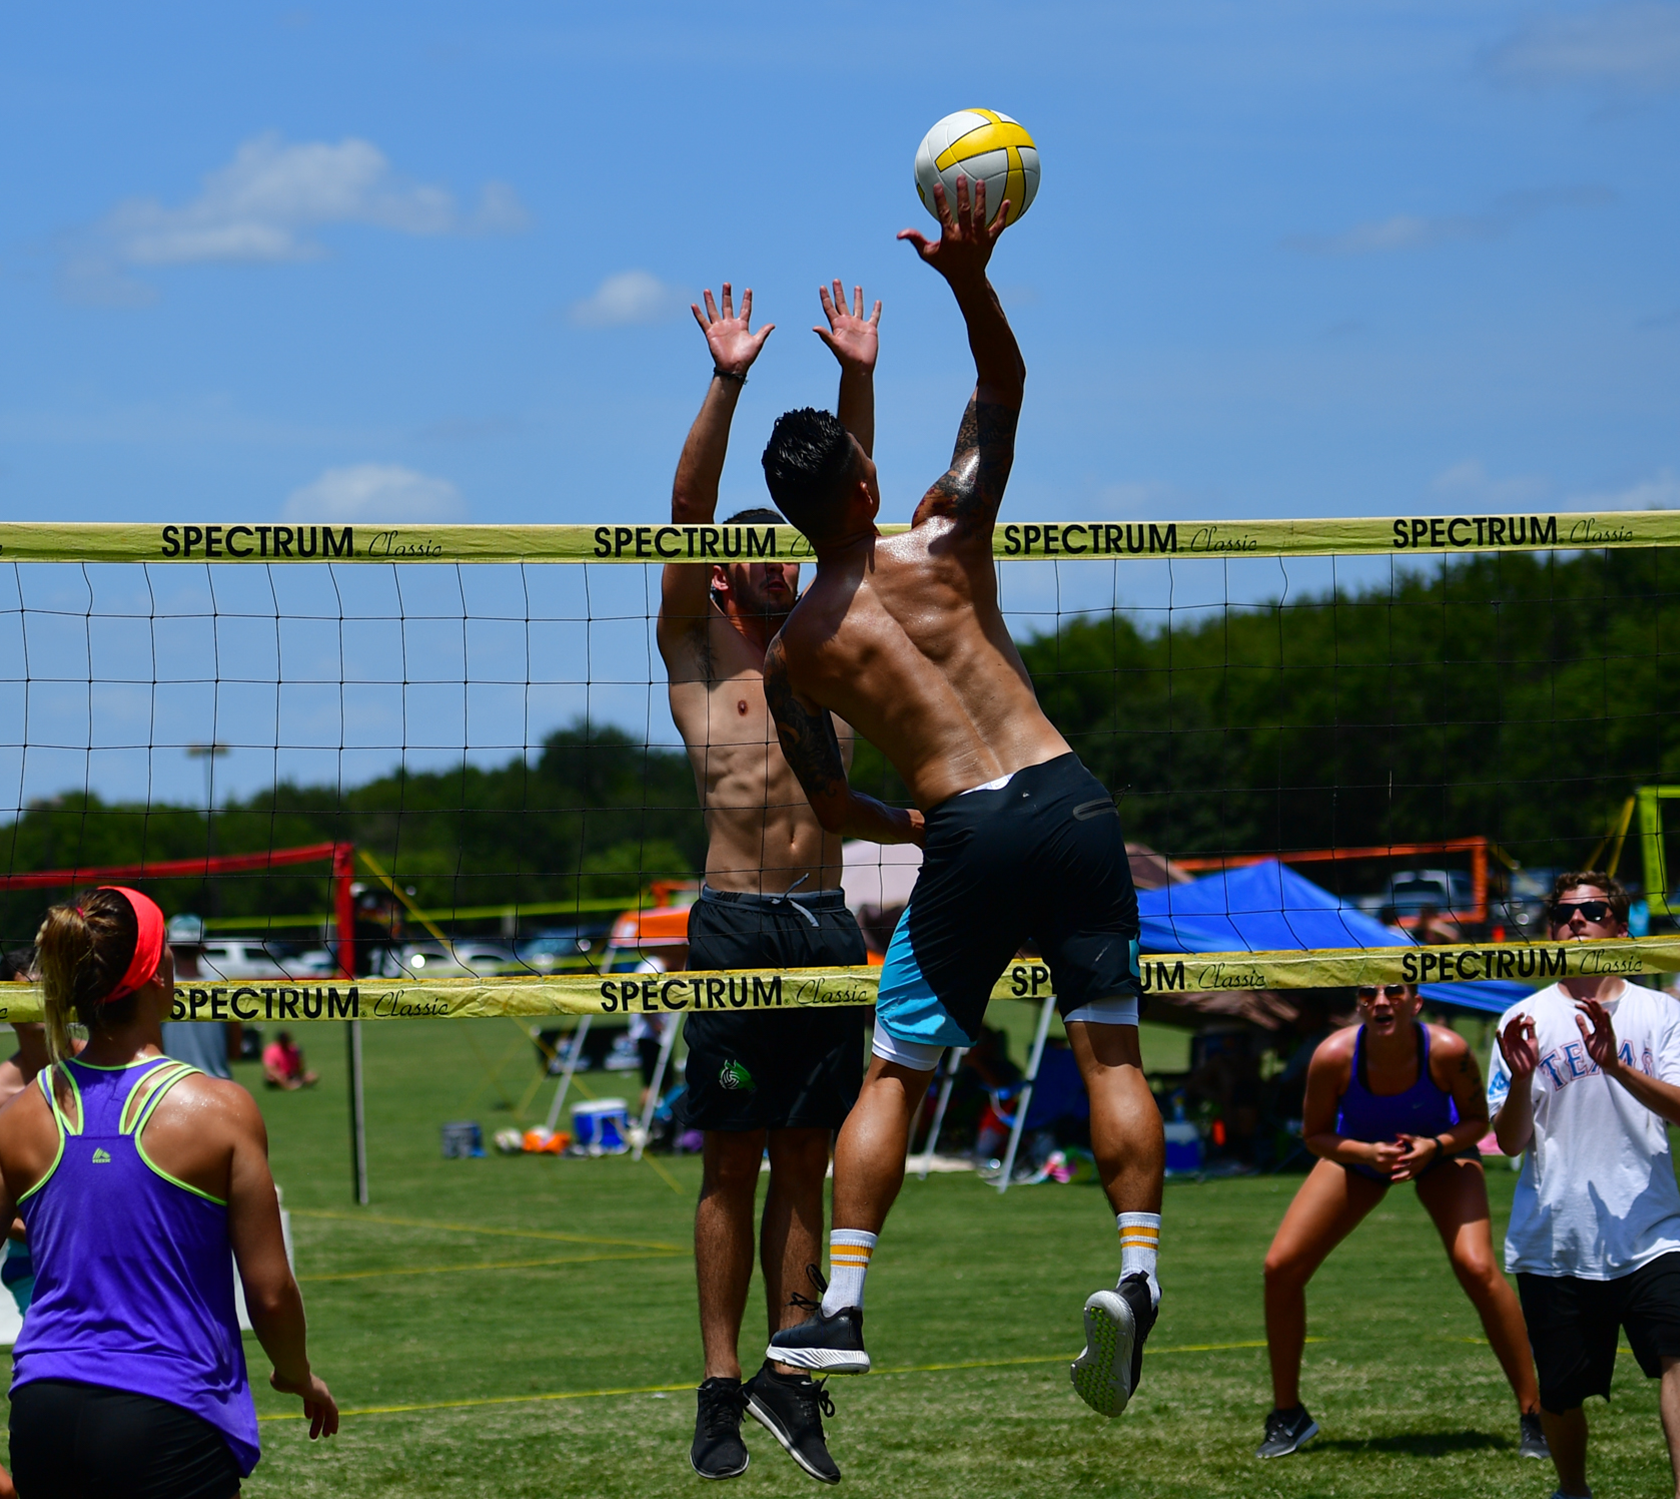 Load video: Number 1 Rated Portable Outdoor Volleyball Set - Park &amp; Sun Sports Spectrum Classic